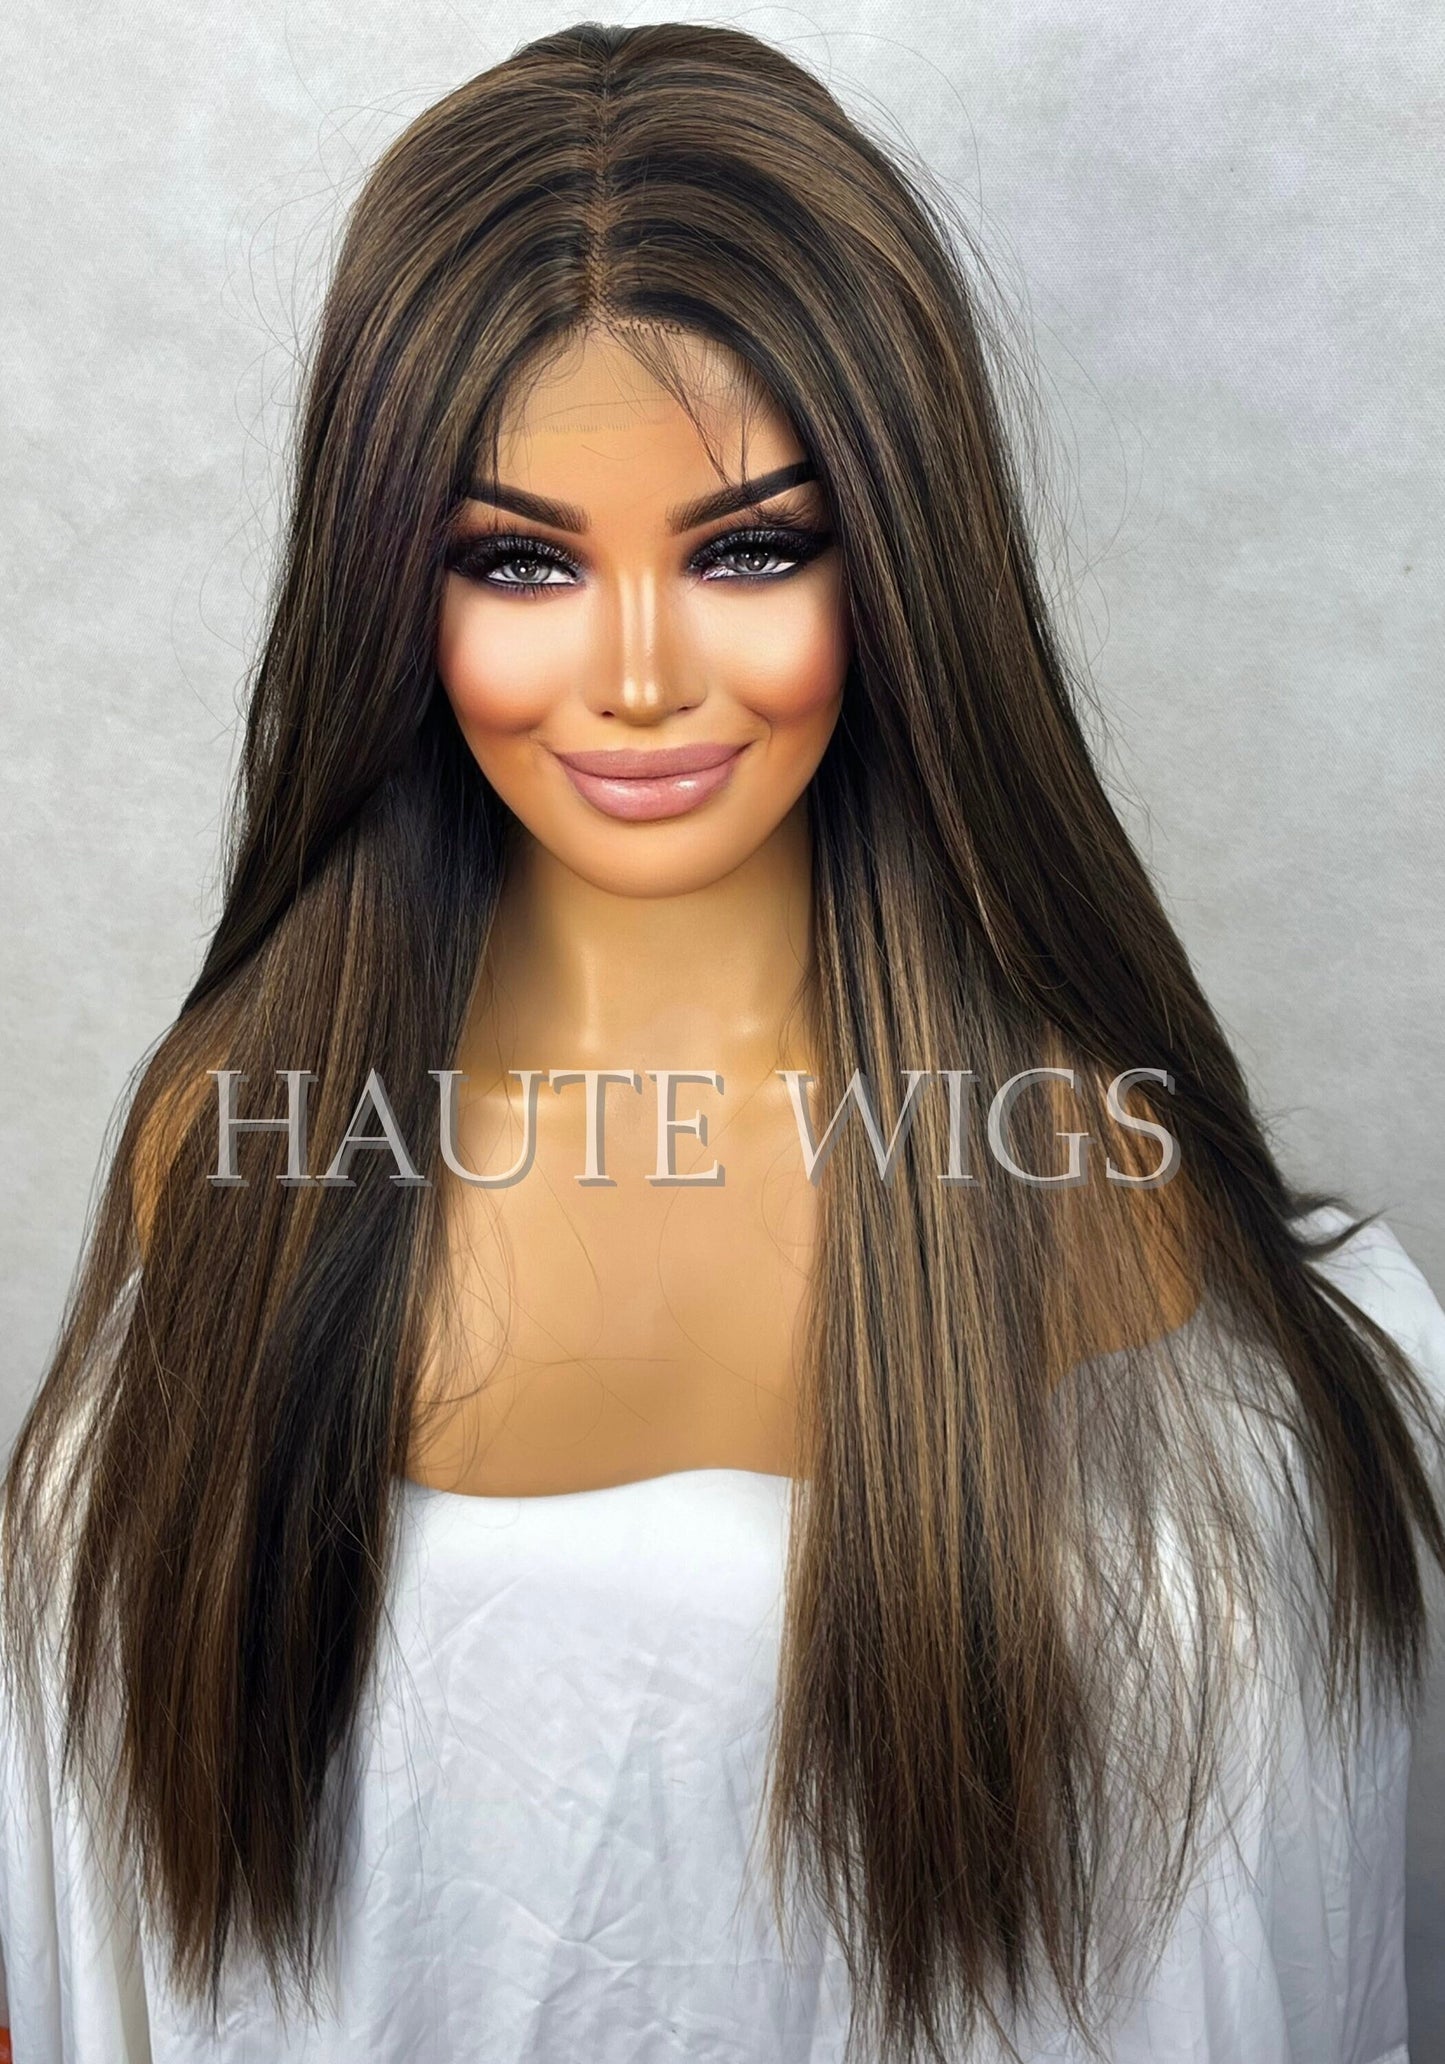 26 Inch BROWN Brunette Wig With Light Highlights Lowlights Streaks Long Straight Womens Wig Human Hair Blends Lace Front Realistic Amazing